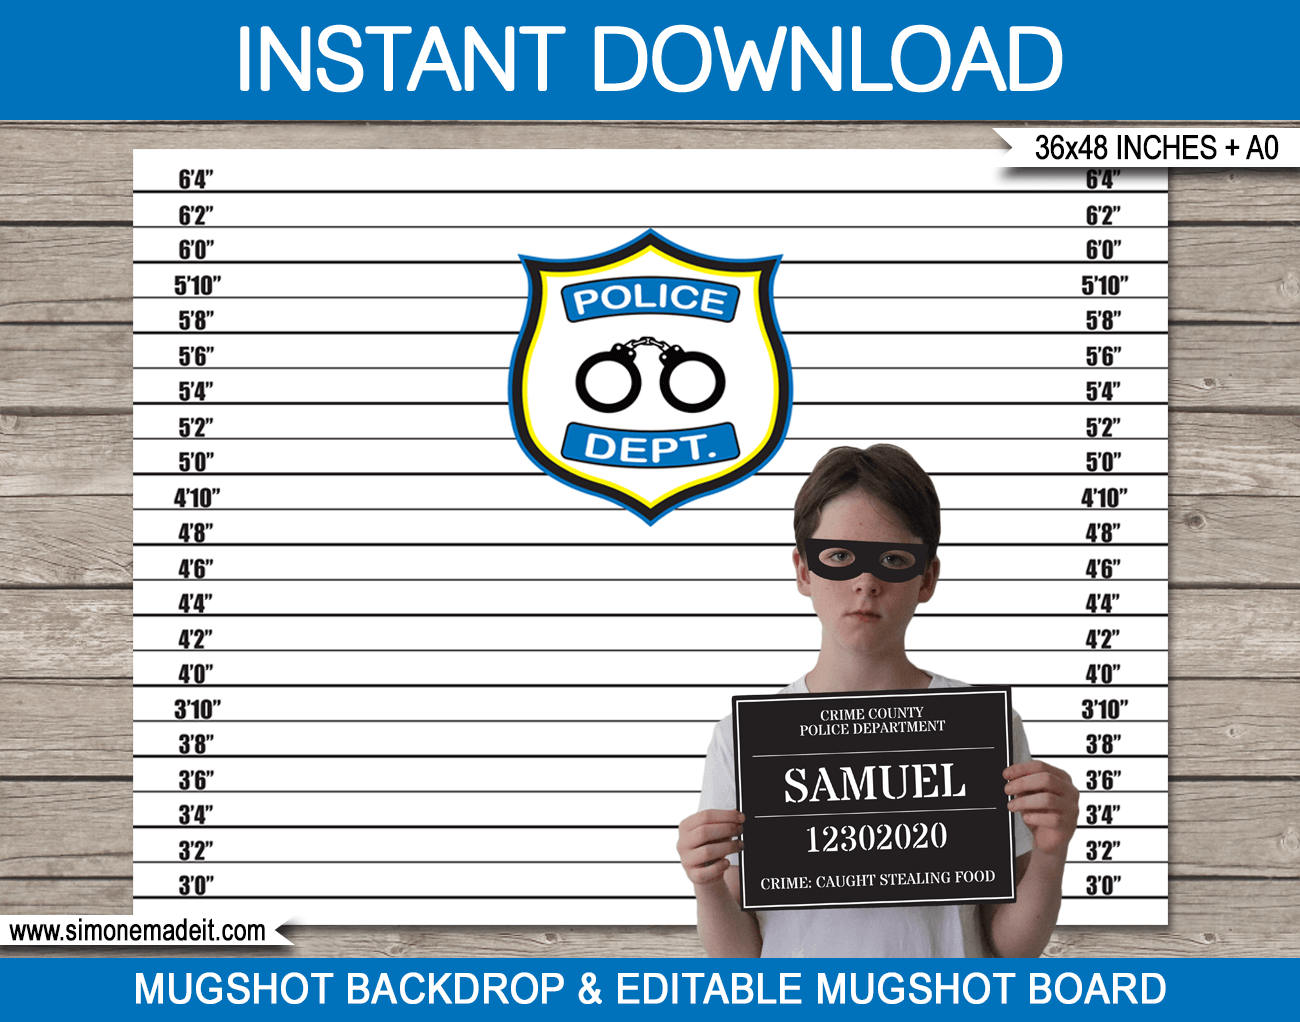 Police Party Mugshot Sign Board & Lineup Backdrop | Murder Mystery | Cops & Robbers, Law Enforcement, Police Theme Birthday Party Decorations | Printable DIY Template | Party Decorations | $4.50 Instant Download via SIMONEmadeit.com